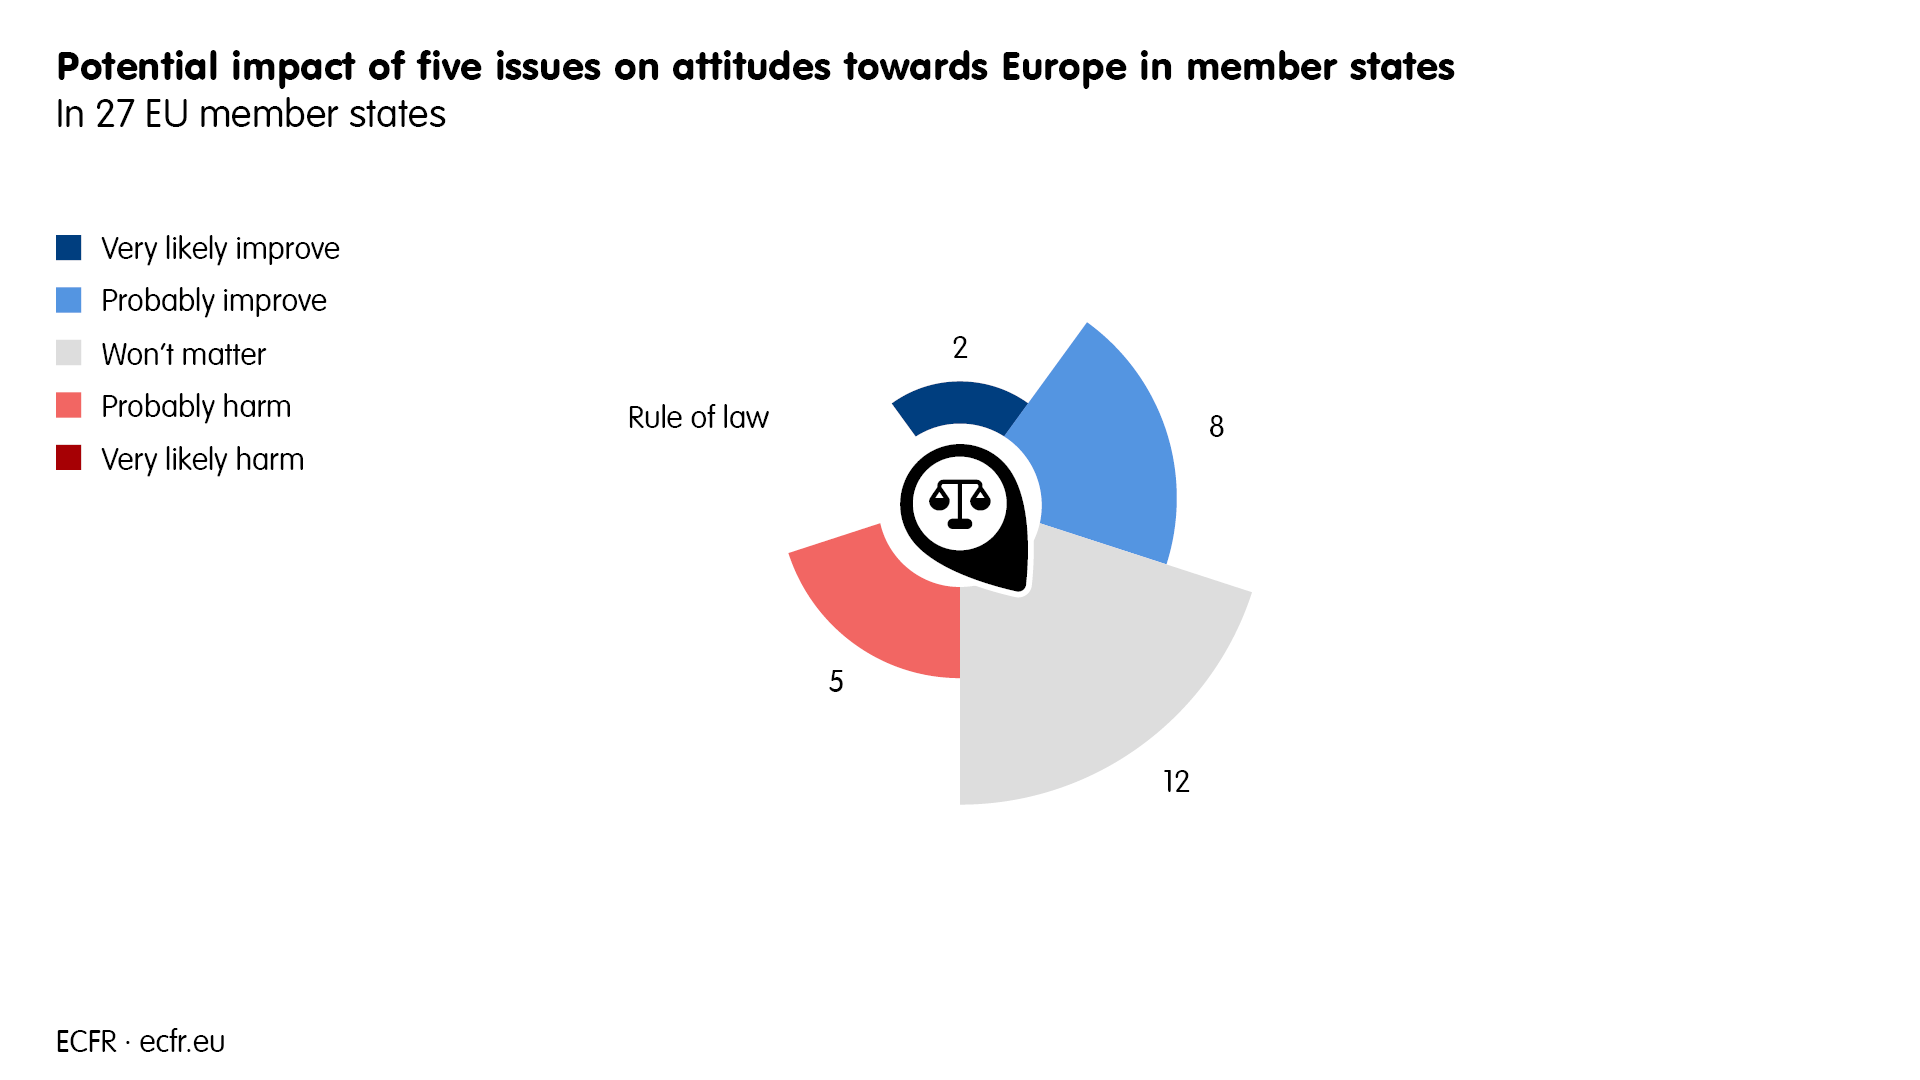 Looking forward, how do you assess the chances that rule of law could influence your country's attitude towards Europe? "Won't matter" was the reply in 12 member states.